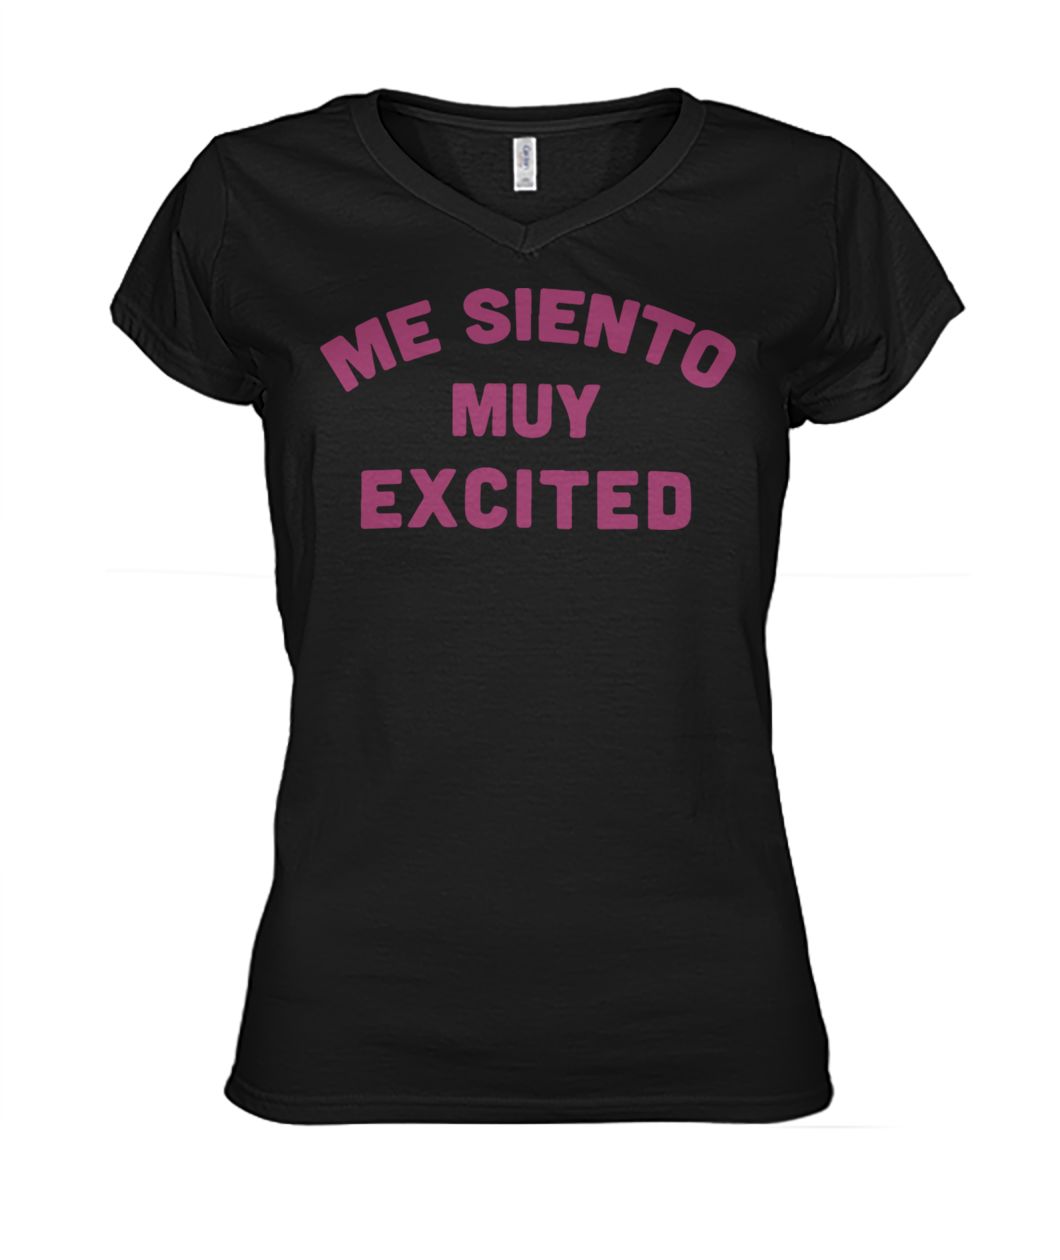 Me siento muy excited women's v-neck